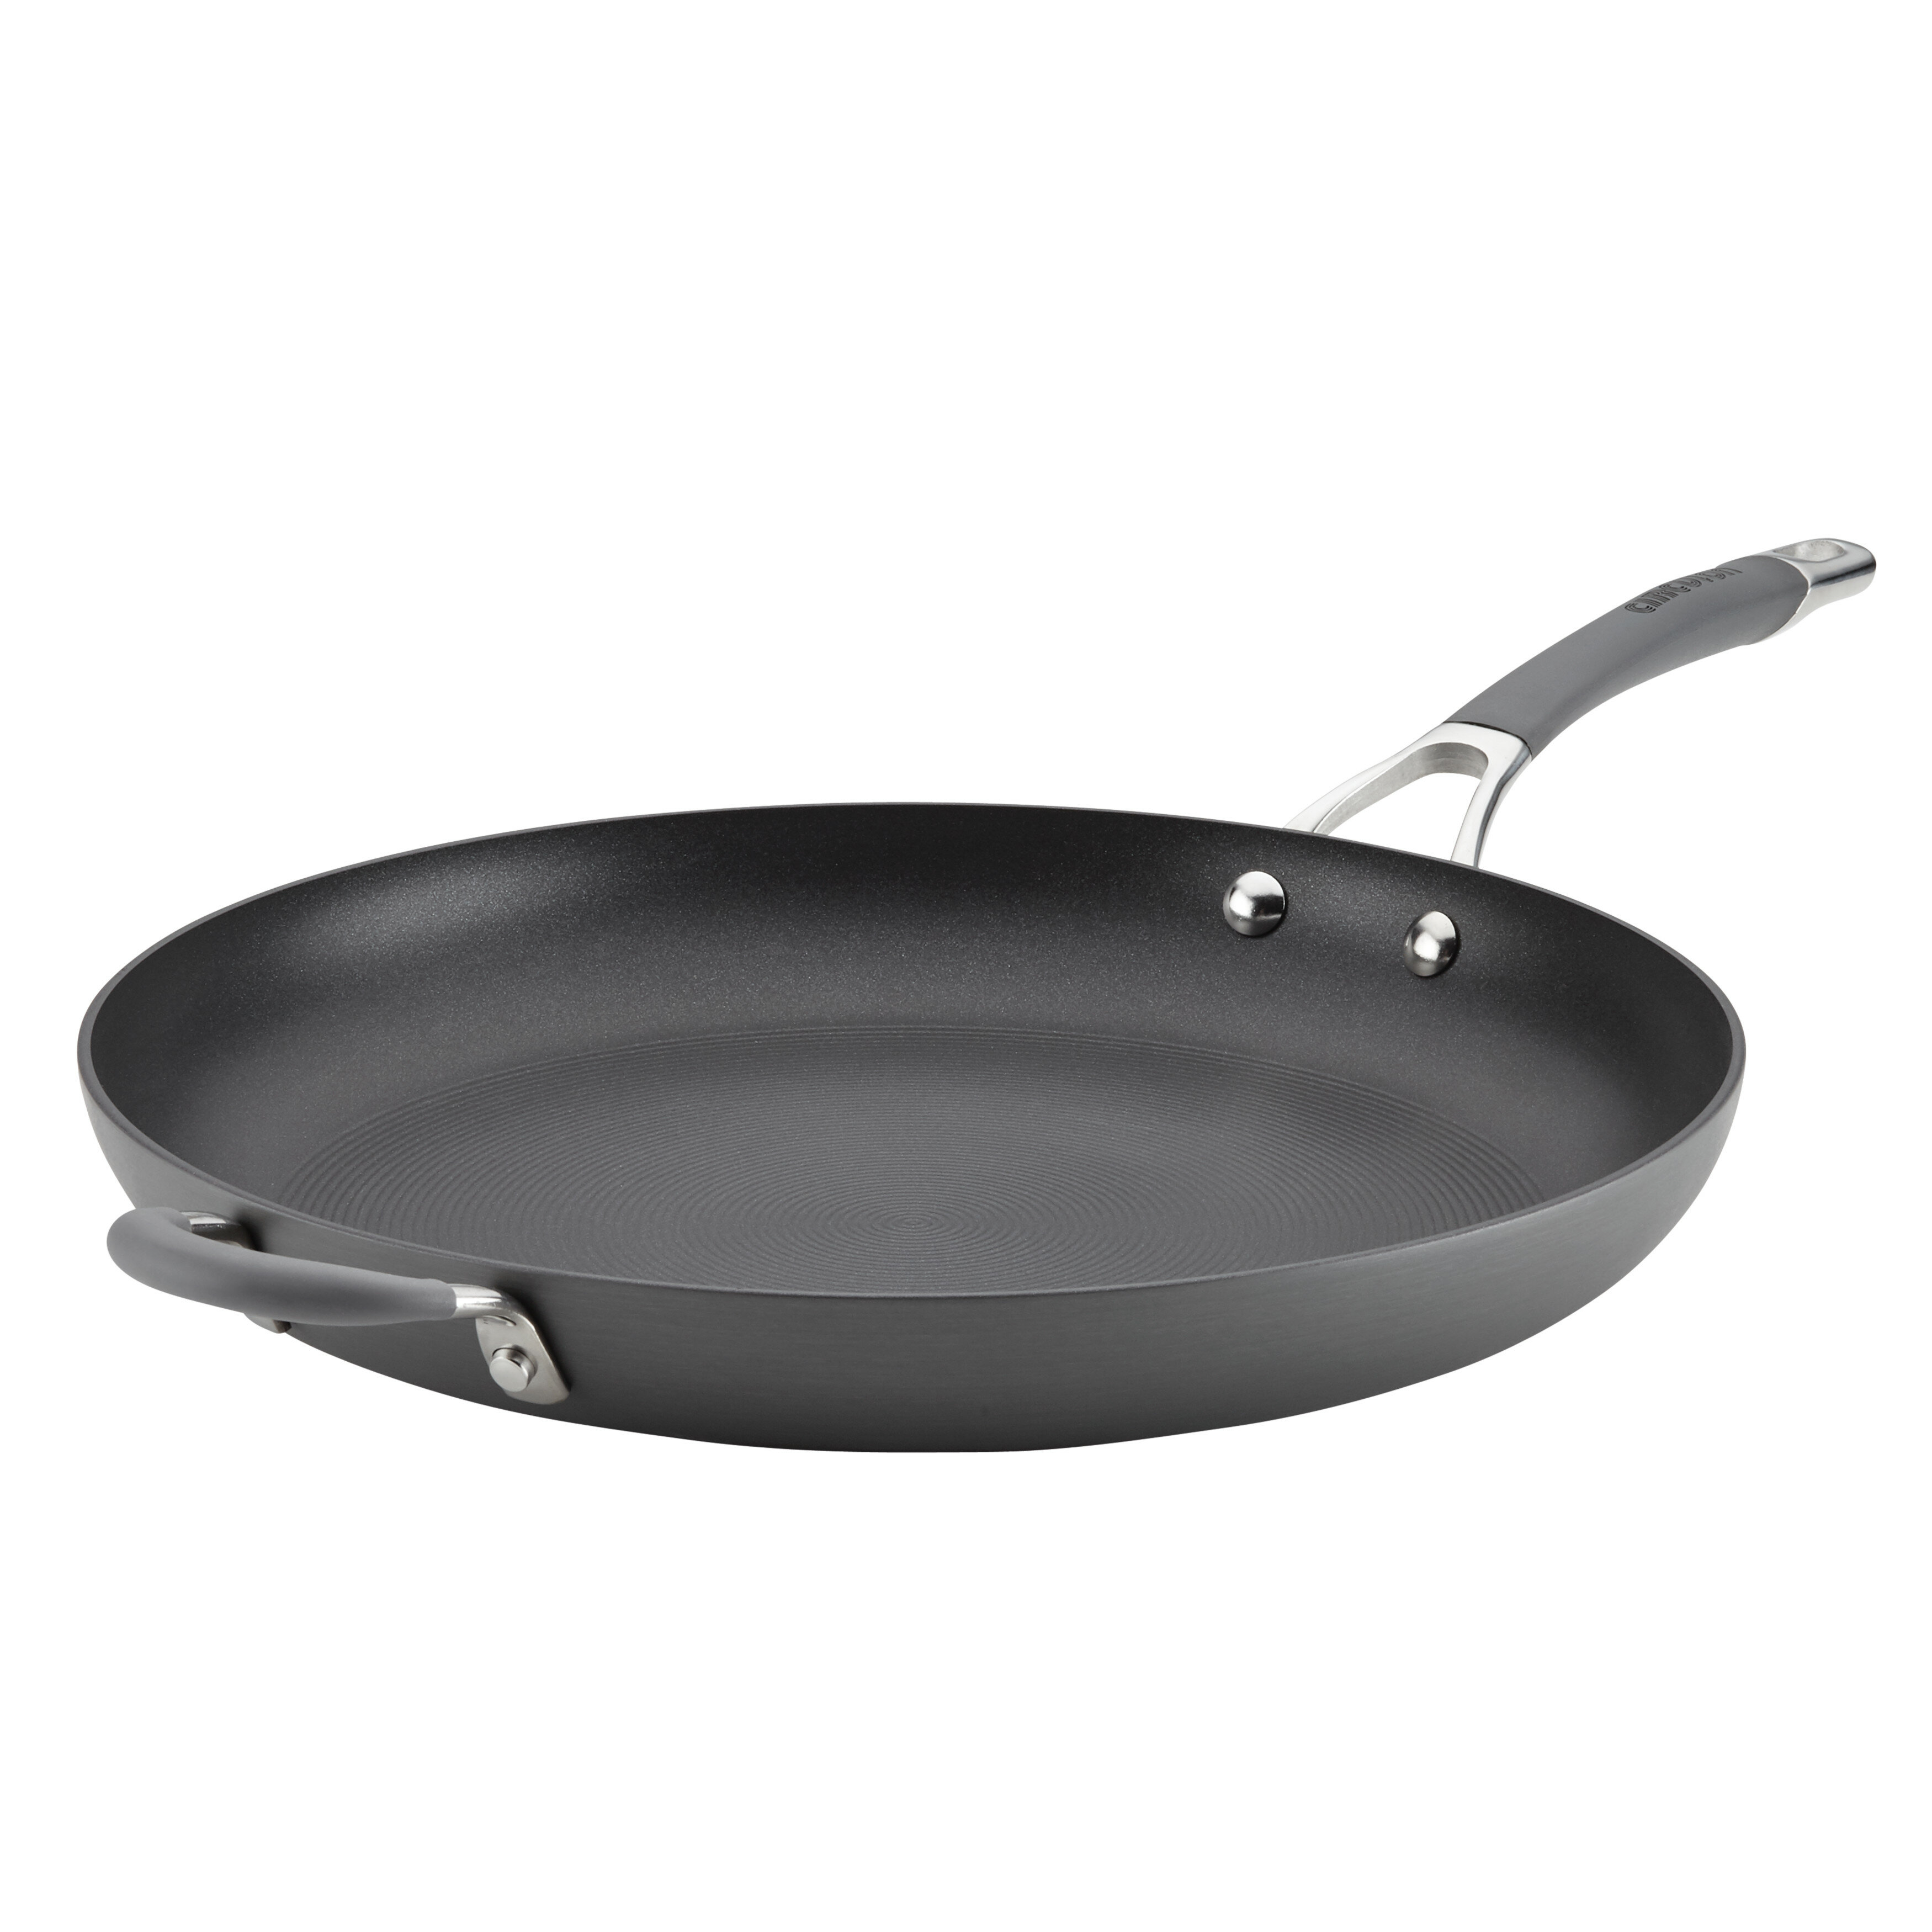 Circulon Radiance Hard Anodized Nonstick Frying Pan / Skillet with Helper  Handle, 14 Inch & Reviews